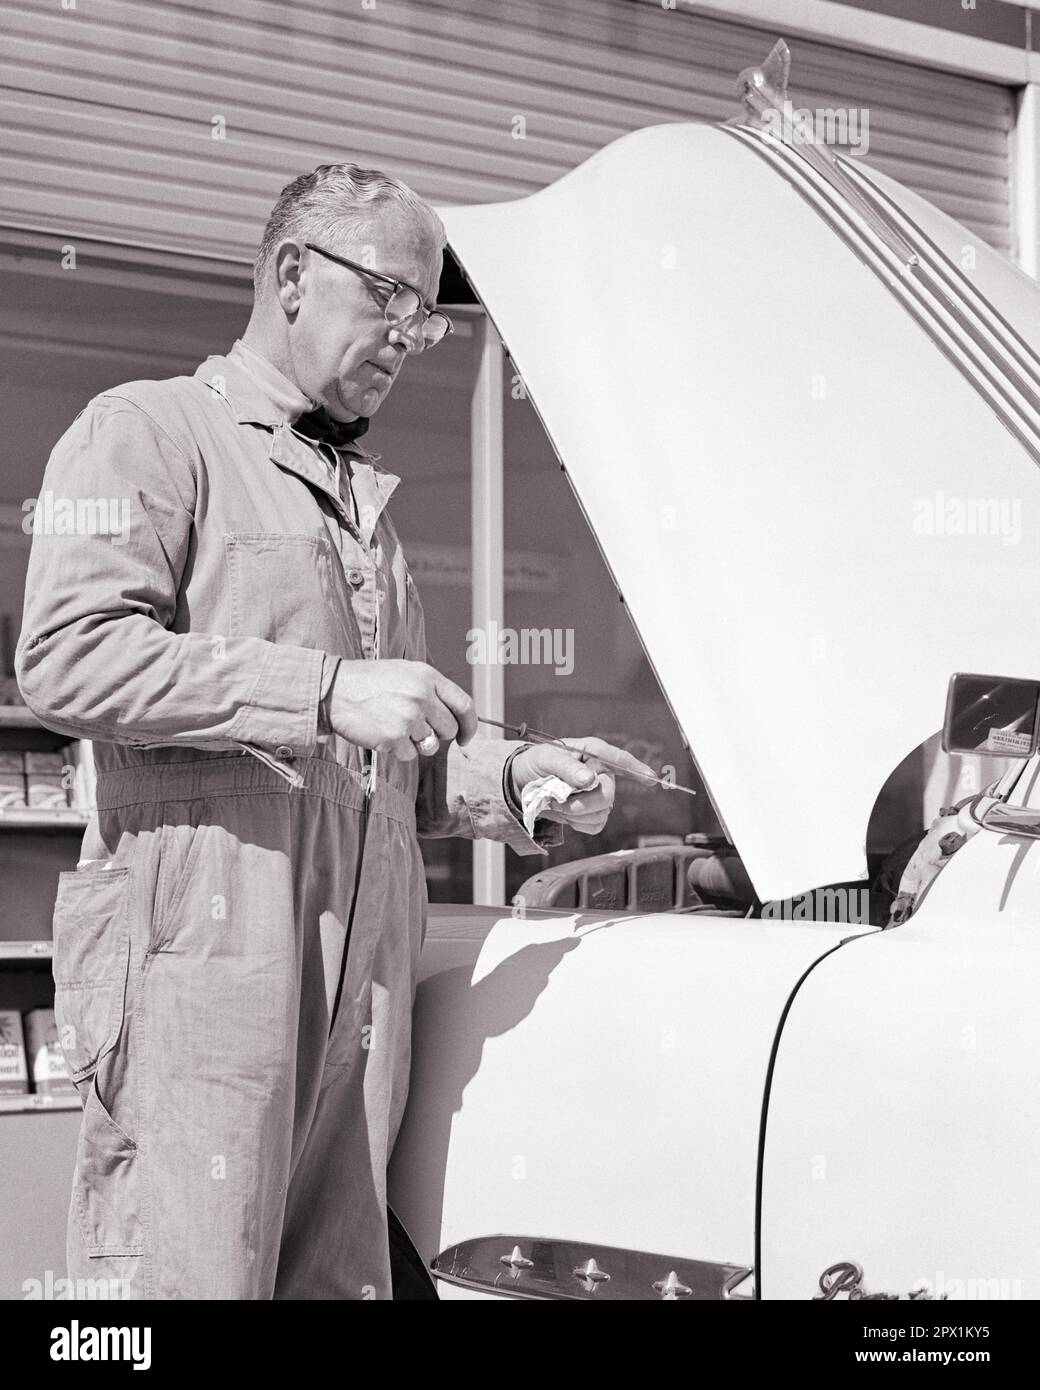 1950s MAN GAS STATION ATTENDANT CHECKING LEVEL OF OIL IN AUTOMOBILE ENGINE - m5124 HAR001 HARS PERSONS OVERALLS AUTOMOBILE MALES PROFESSION TRANSPORTATION MIDDLE-AGED B&W GOALS SKILL OCCUPATION SKILLS MIDDLE-AGED WOMAN DISCOVERY PROTECTION CUSTOMER SERVICE AUTOS CAREERS LOW ANGLE LABOR OPPORTUNITY EMPLOYMENT OCCUPATIONS MAINTENANCE AUTOMOBILES INSPECTING VEHICLES INFRASTRUCTURE OILS EMPLOYEE ATTENDANT DIPSTICK LEVEL LUBRICATION BLACK AND WHITE CAUCASIAN ETHNICITY COVERALLS FOSSIL FUEL HAR001 LABORING OLD FASHIONED Stock Photo